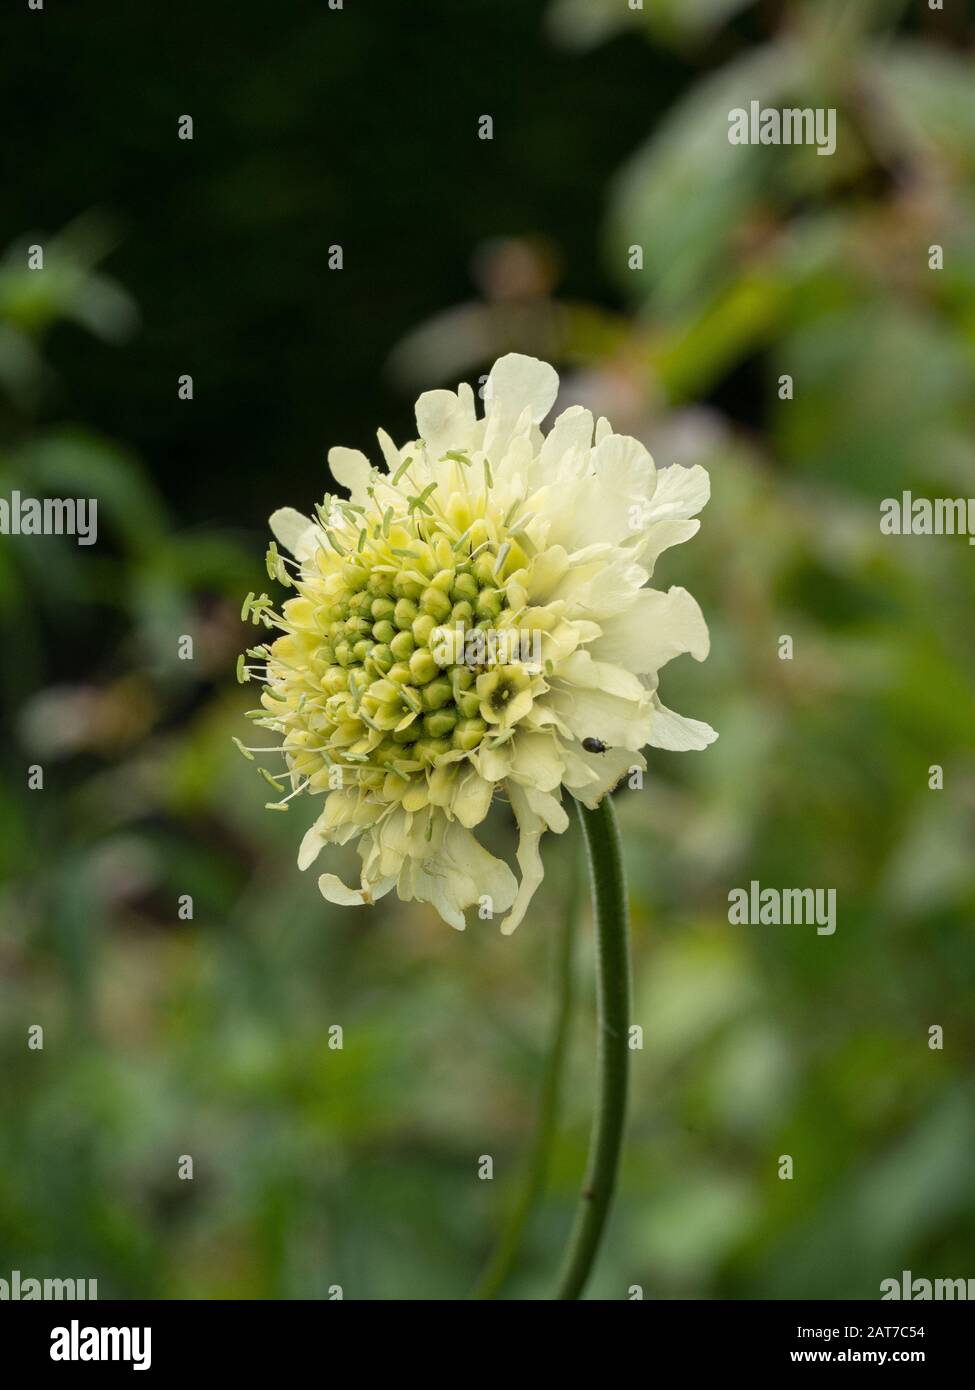 A close up of a single pale yellow flower of Cephalaria gigantea the giant scabious Stock Photo